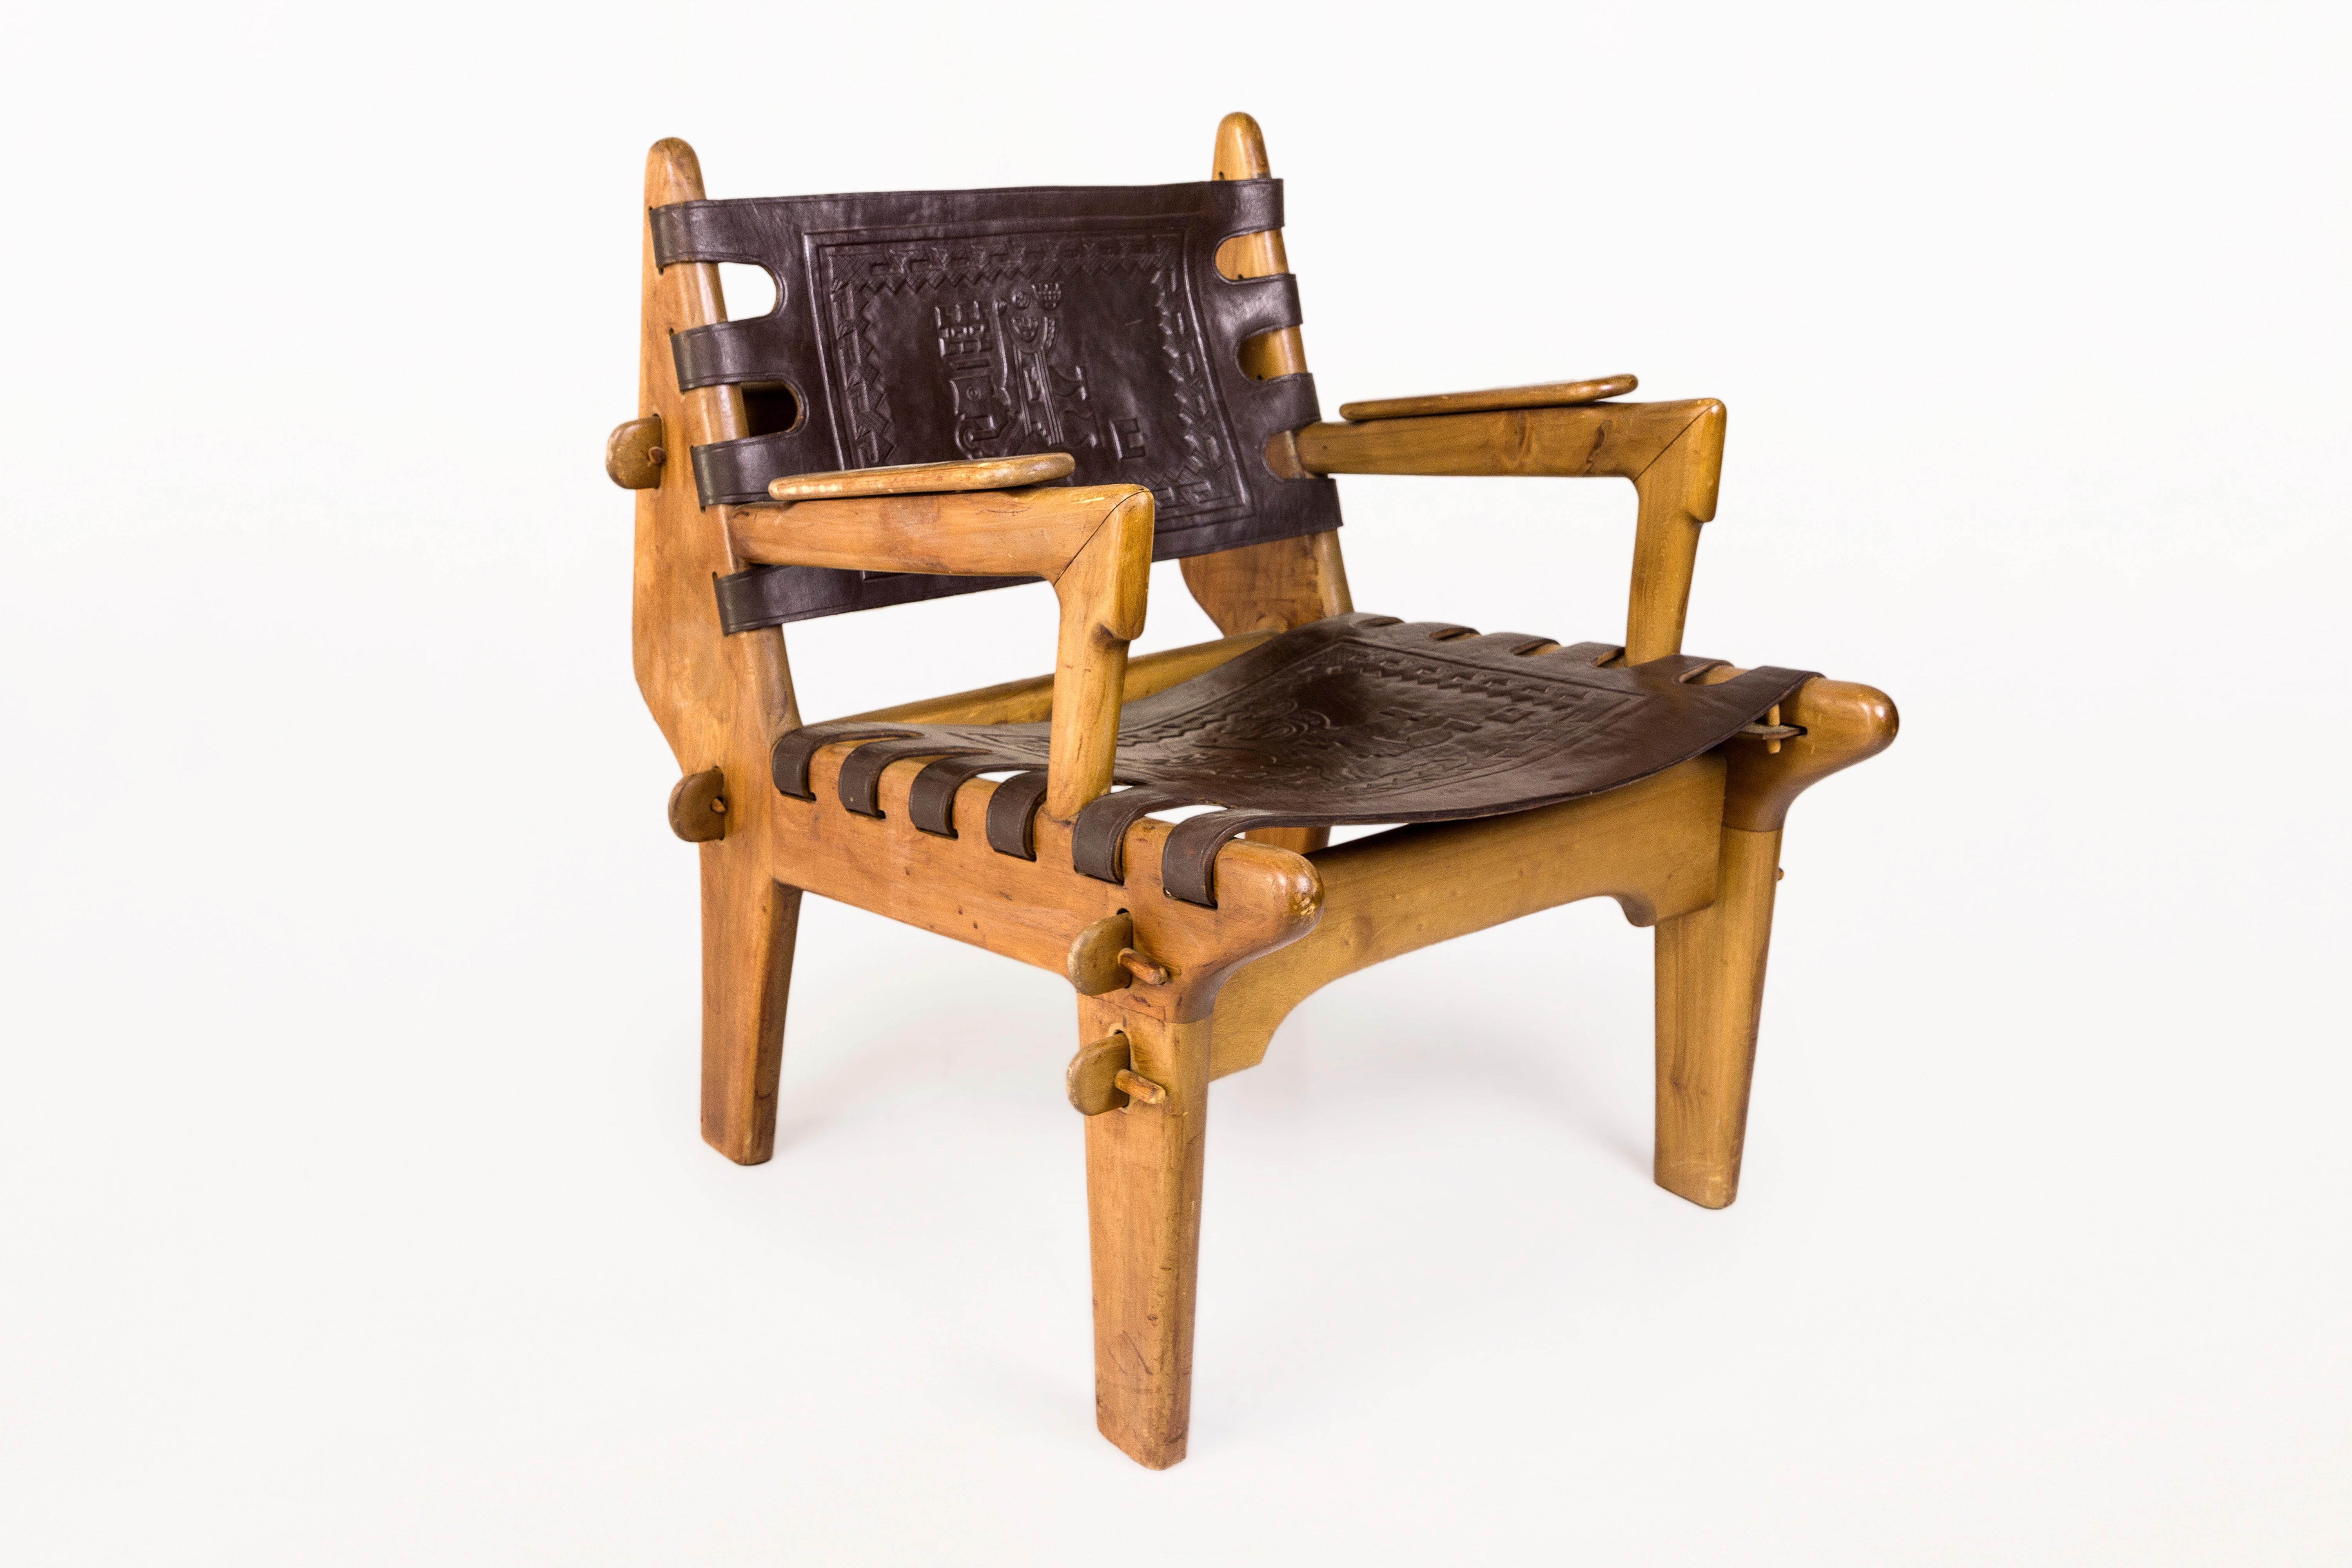 Angel Pazmino, pair of armchairs with side table,
wood and leather,
circa 1970, Brazil.
Armchair: Height 70 cm, seat height 35 cm, width 63 cm, depth 70 cm.
Table: height 44 cm, width 41 cm, depth 41 cm.